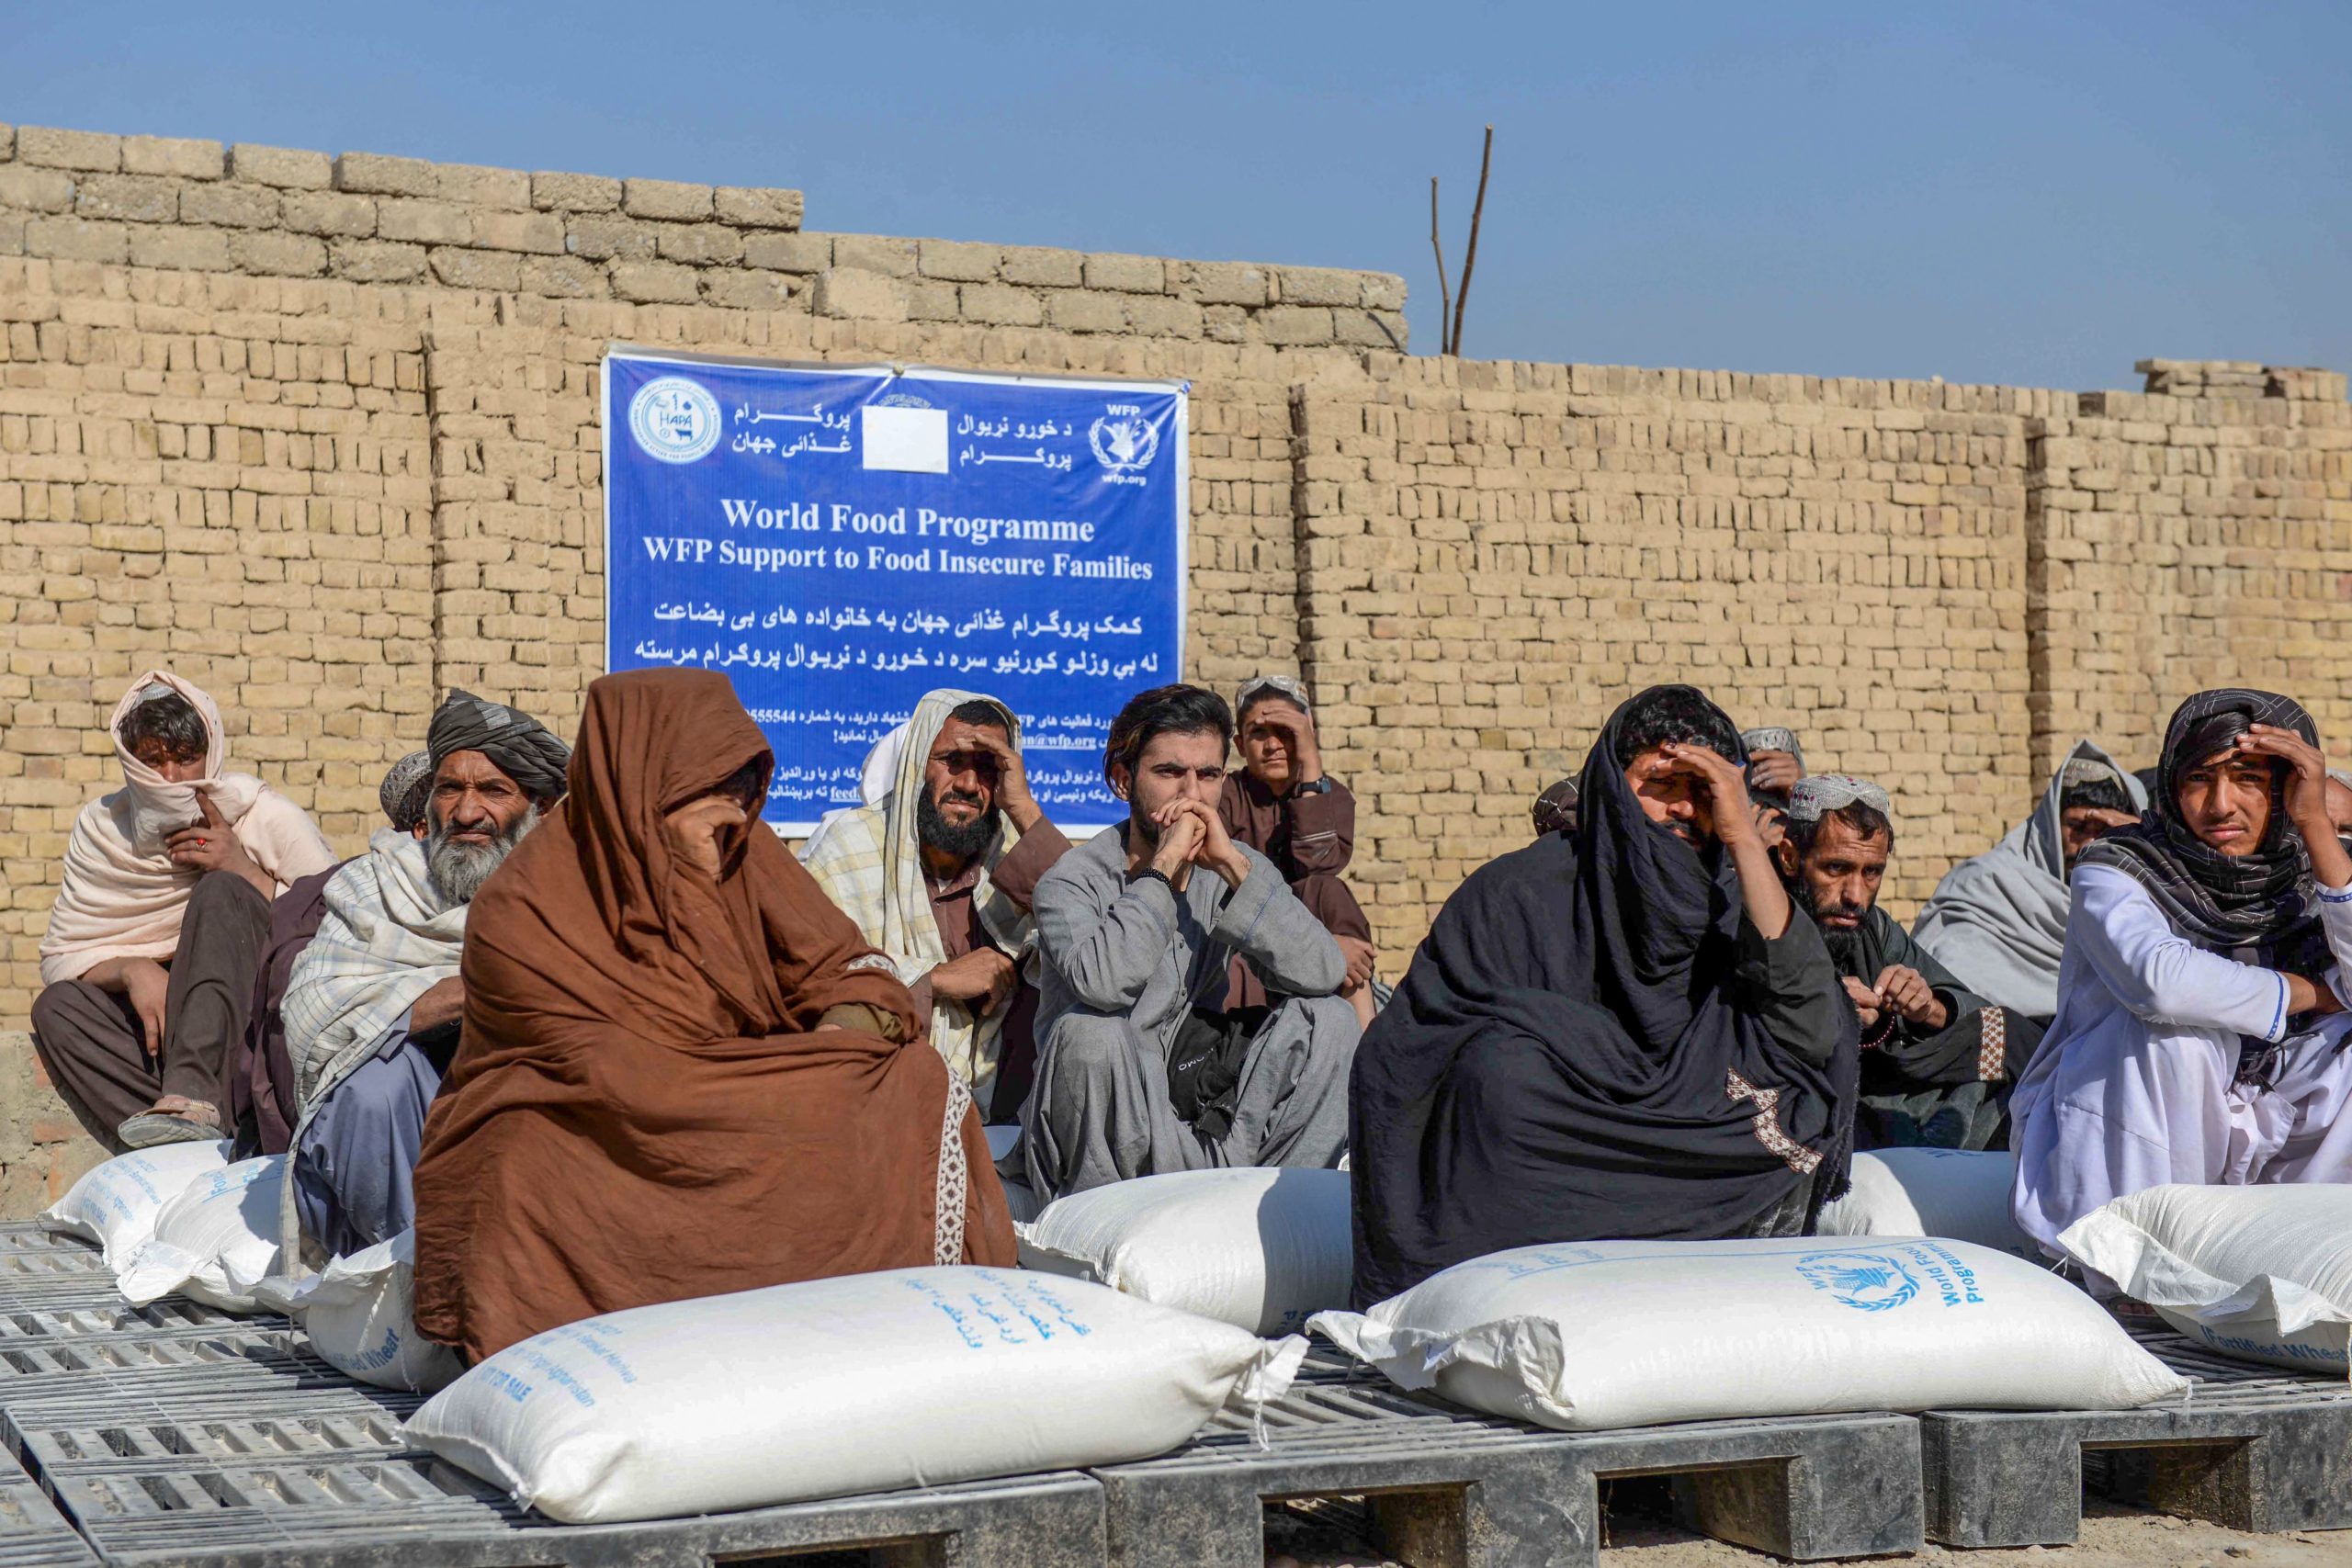 Afghan people sit besides sacks of food grains distributed as an aid by the World Food Programme (WFP) in Kandahar on October 19, 2021. (Photo by JAVED TANVEER/AFP via Getty Images)